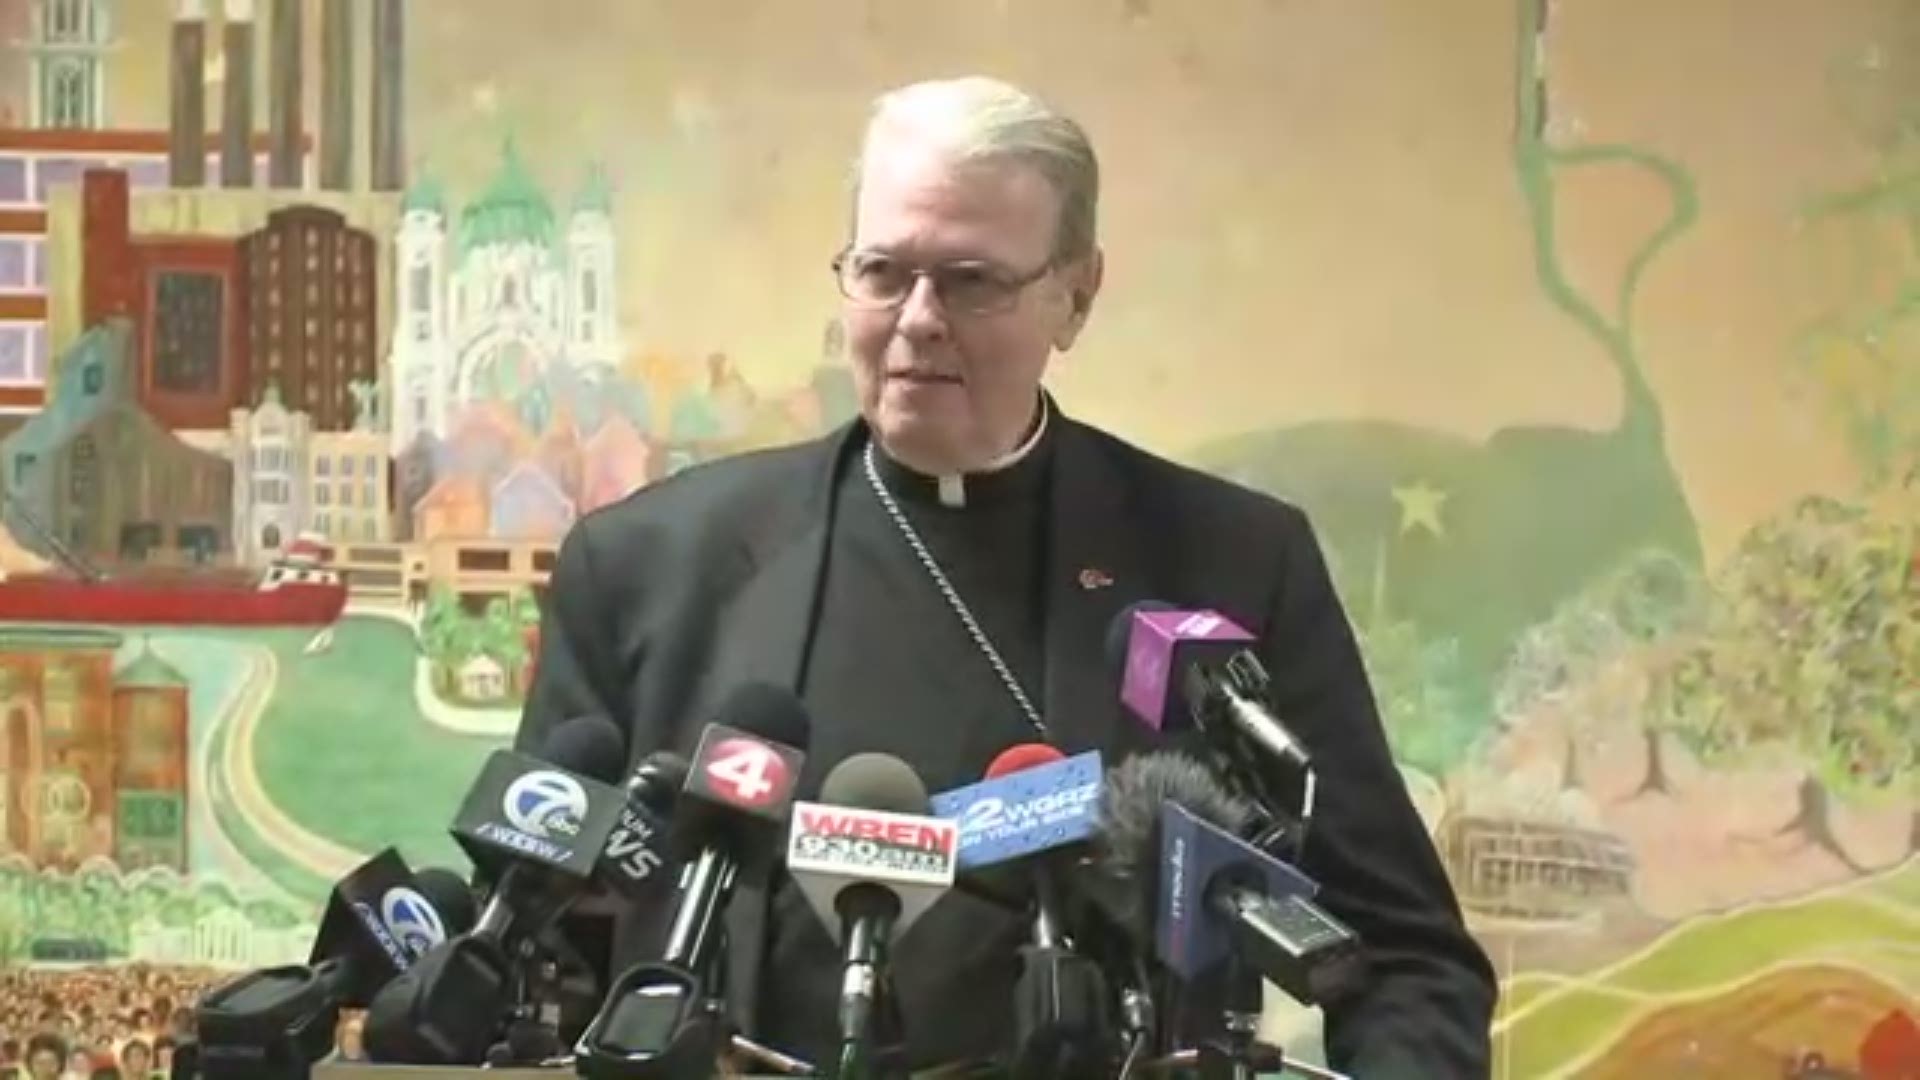 Bishop Edward B. Scharfenberger, the current bishop of Albany, has been appointed Apostolic Administrator for the Diocese of Buffalo